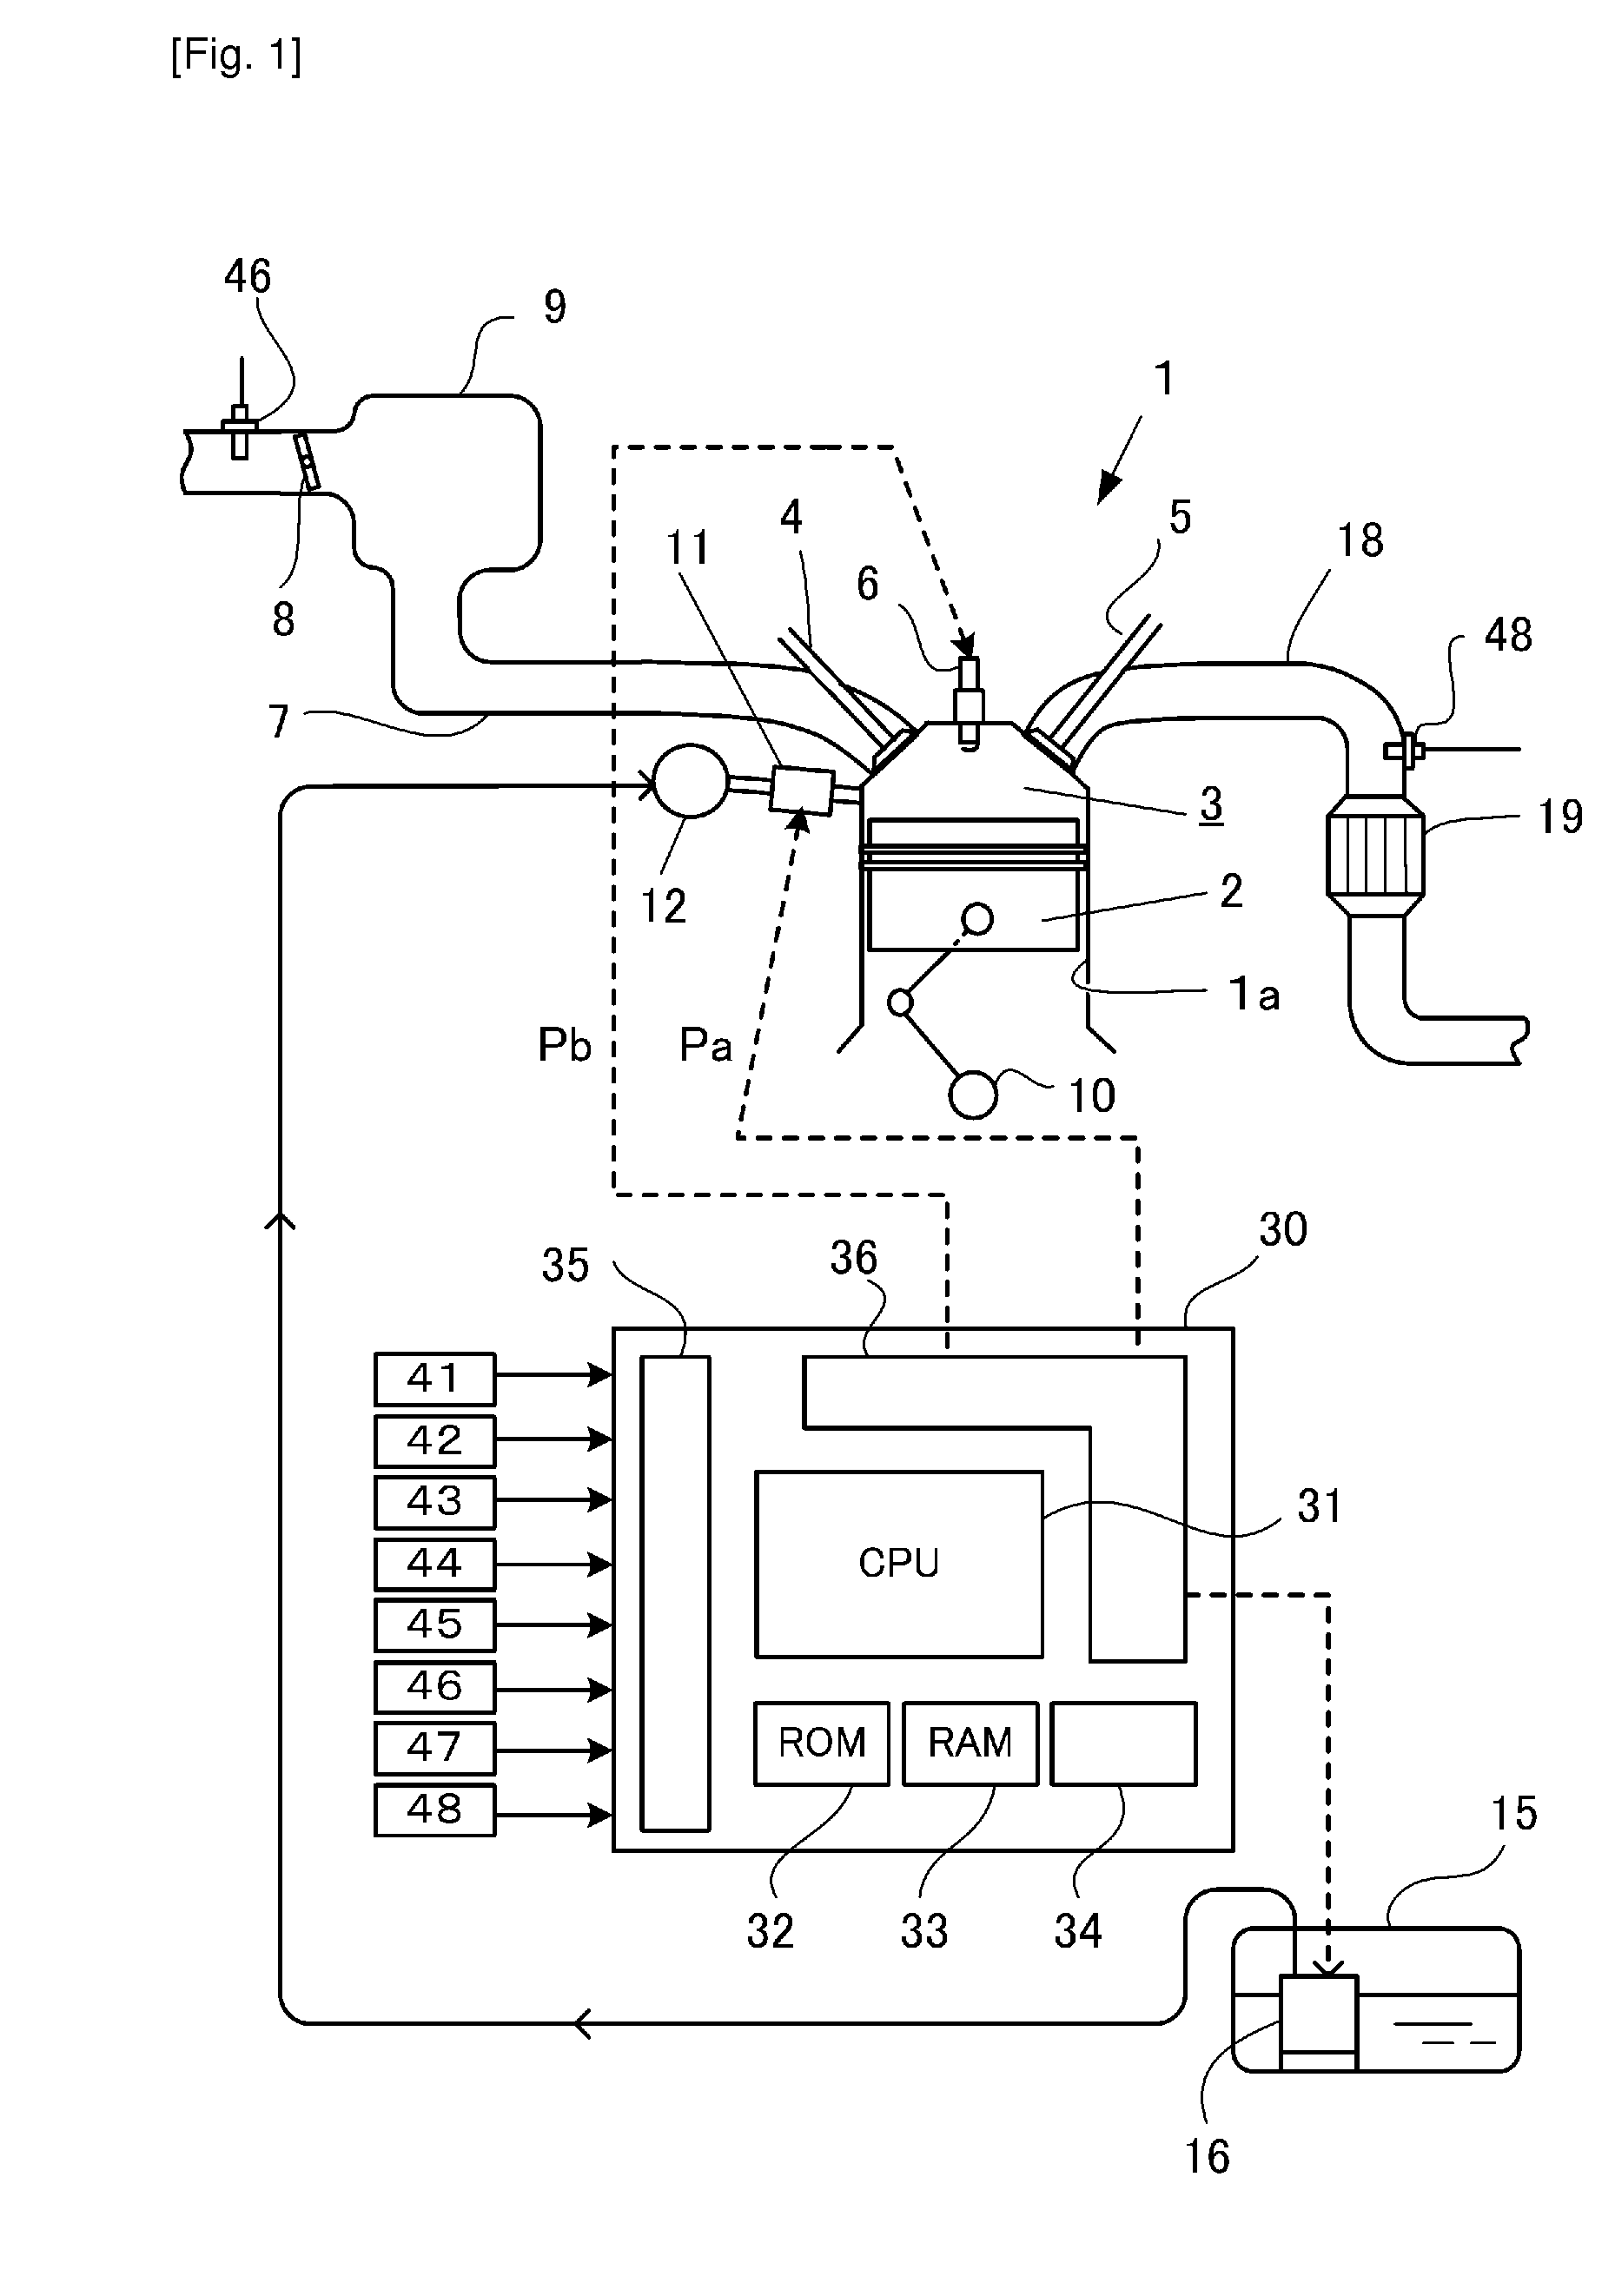 Misfire detection apparatus for internal combustion engine